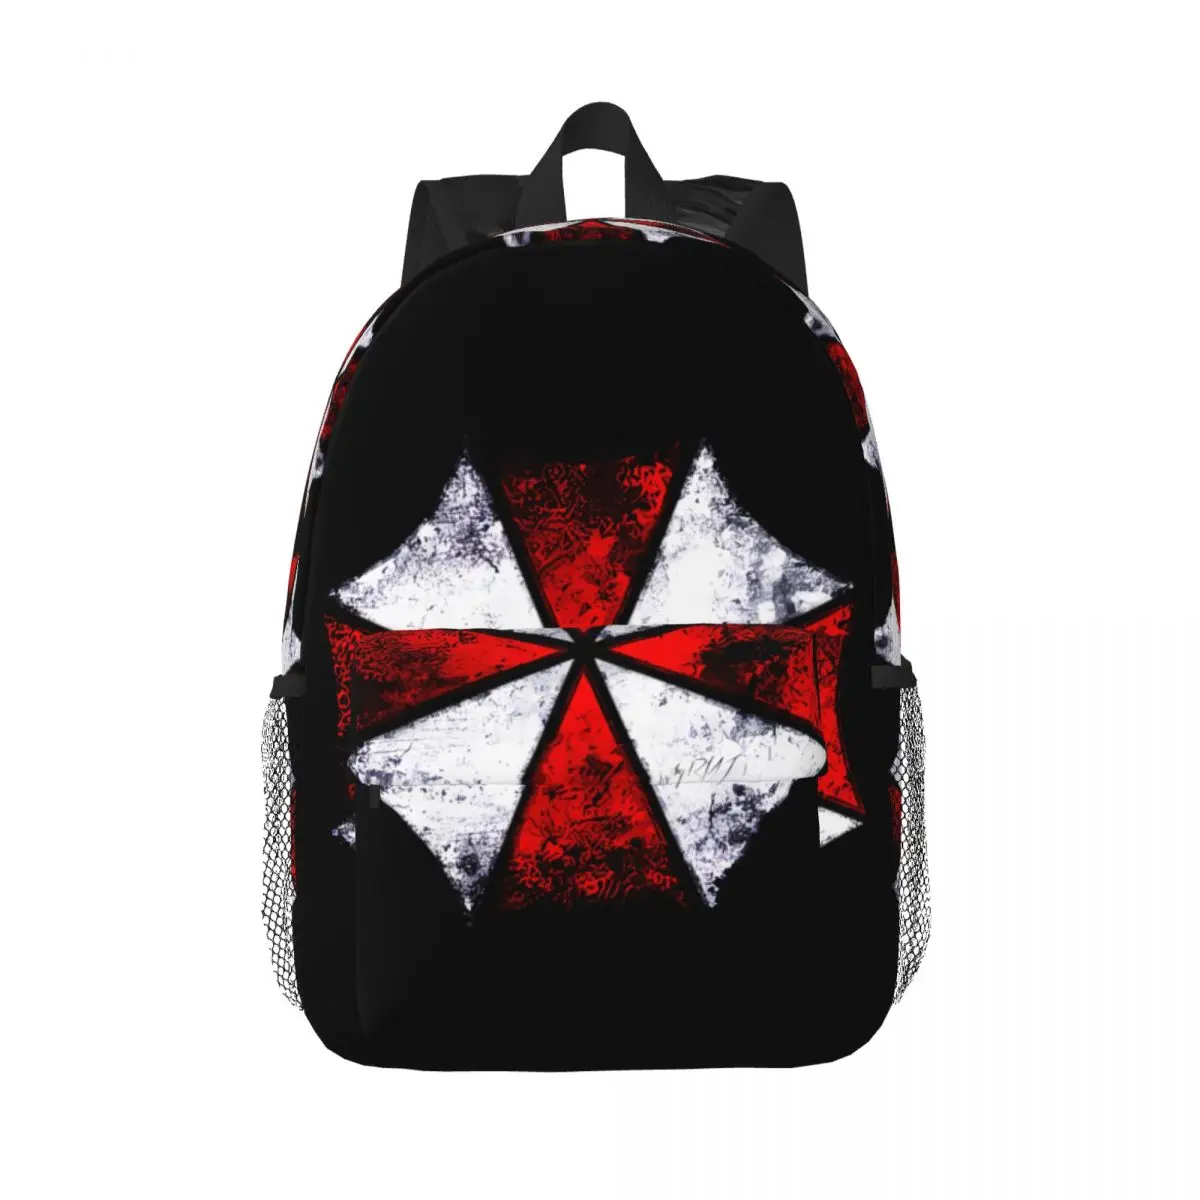 

Umbrella Corp Backpack Middle High College School Student Bookbag